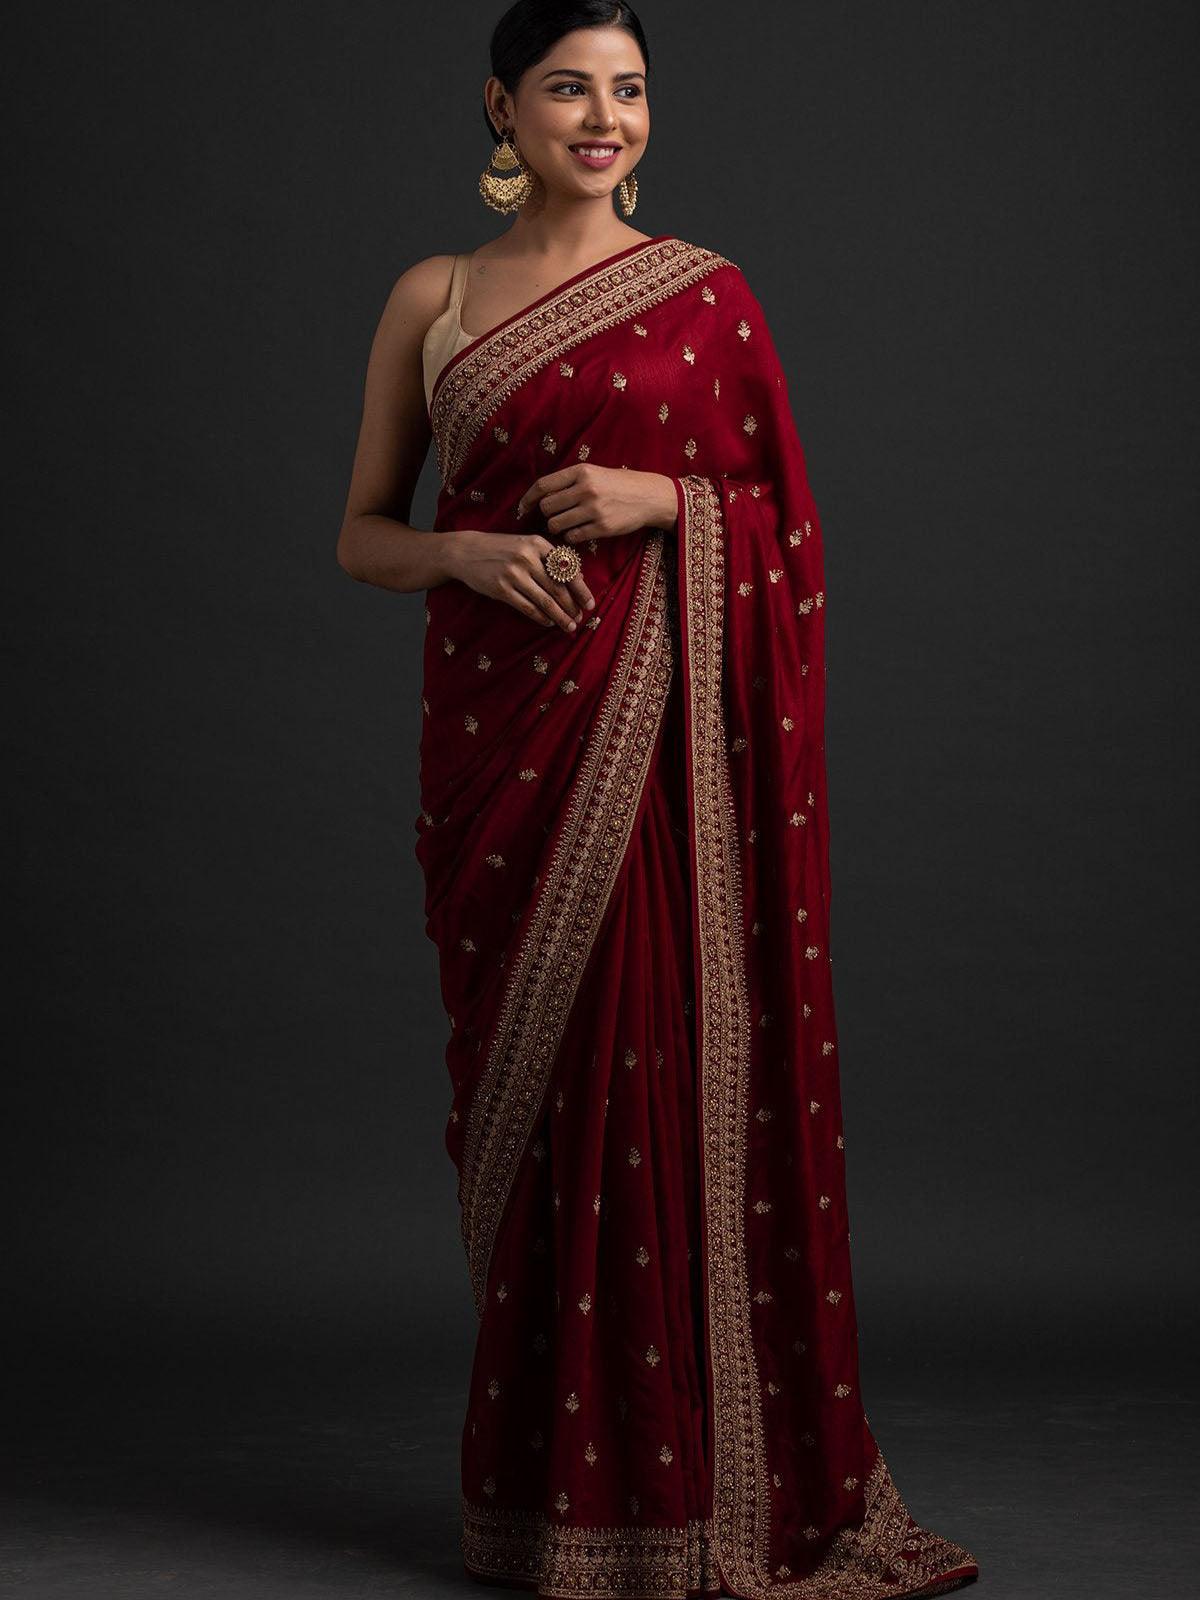 Women's Maroon Beautifully Embroidered Wedding Saree - Odette